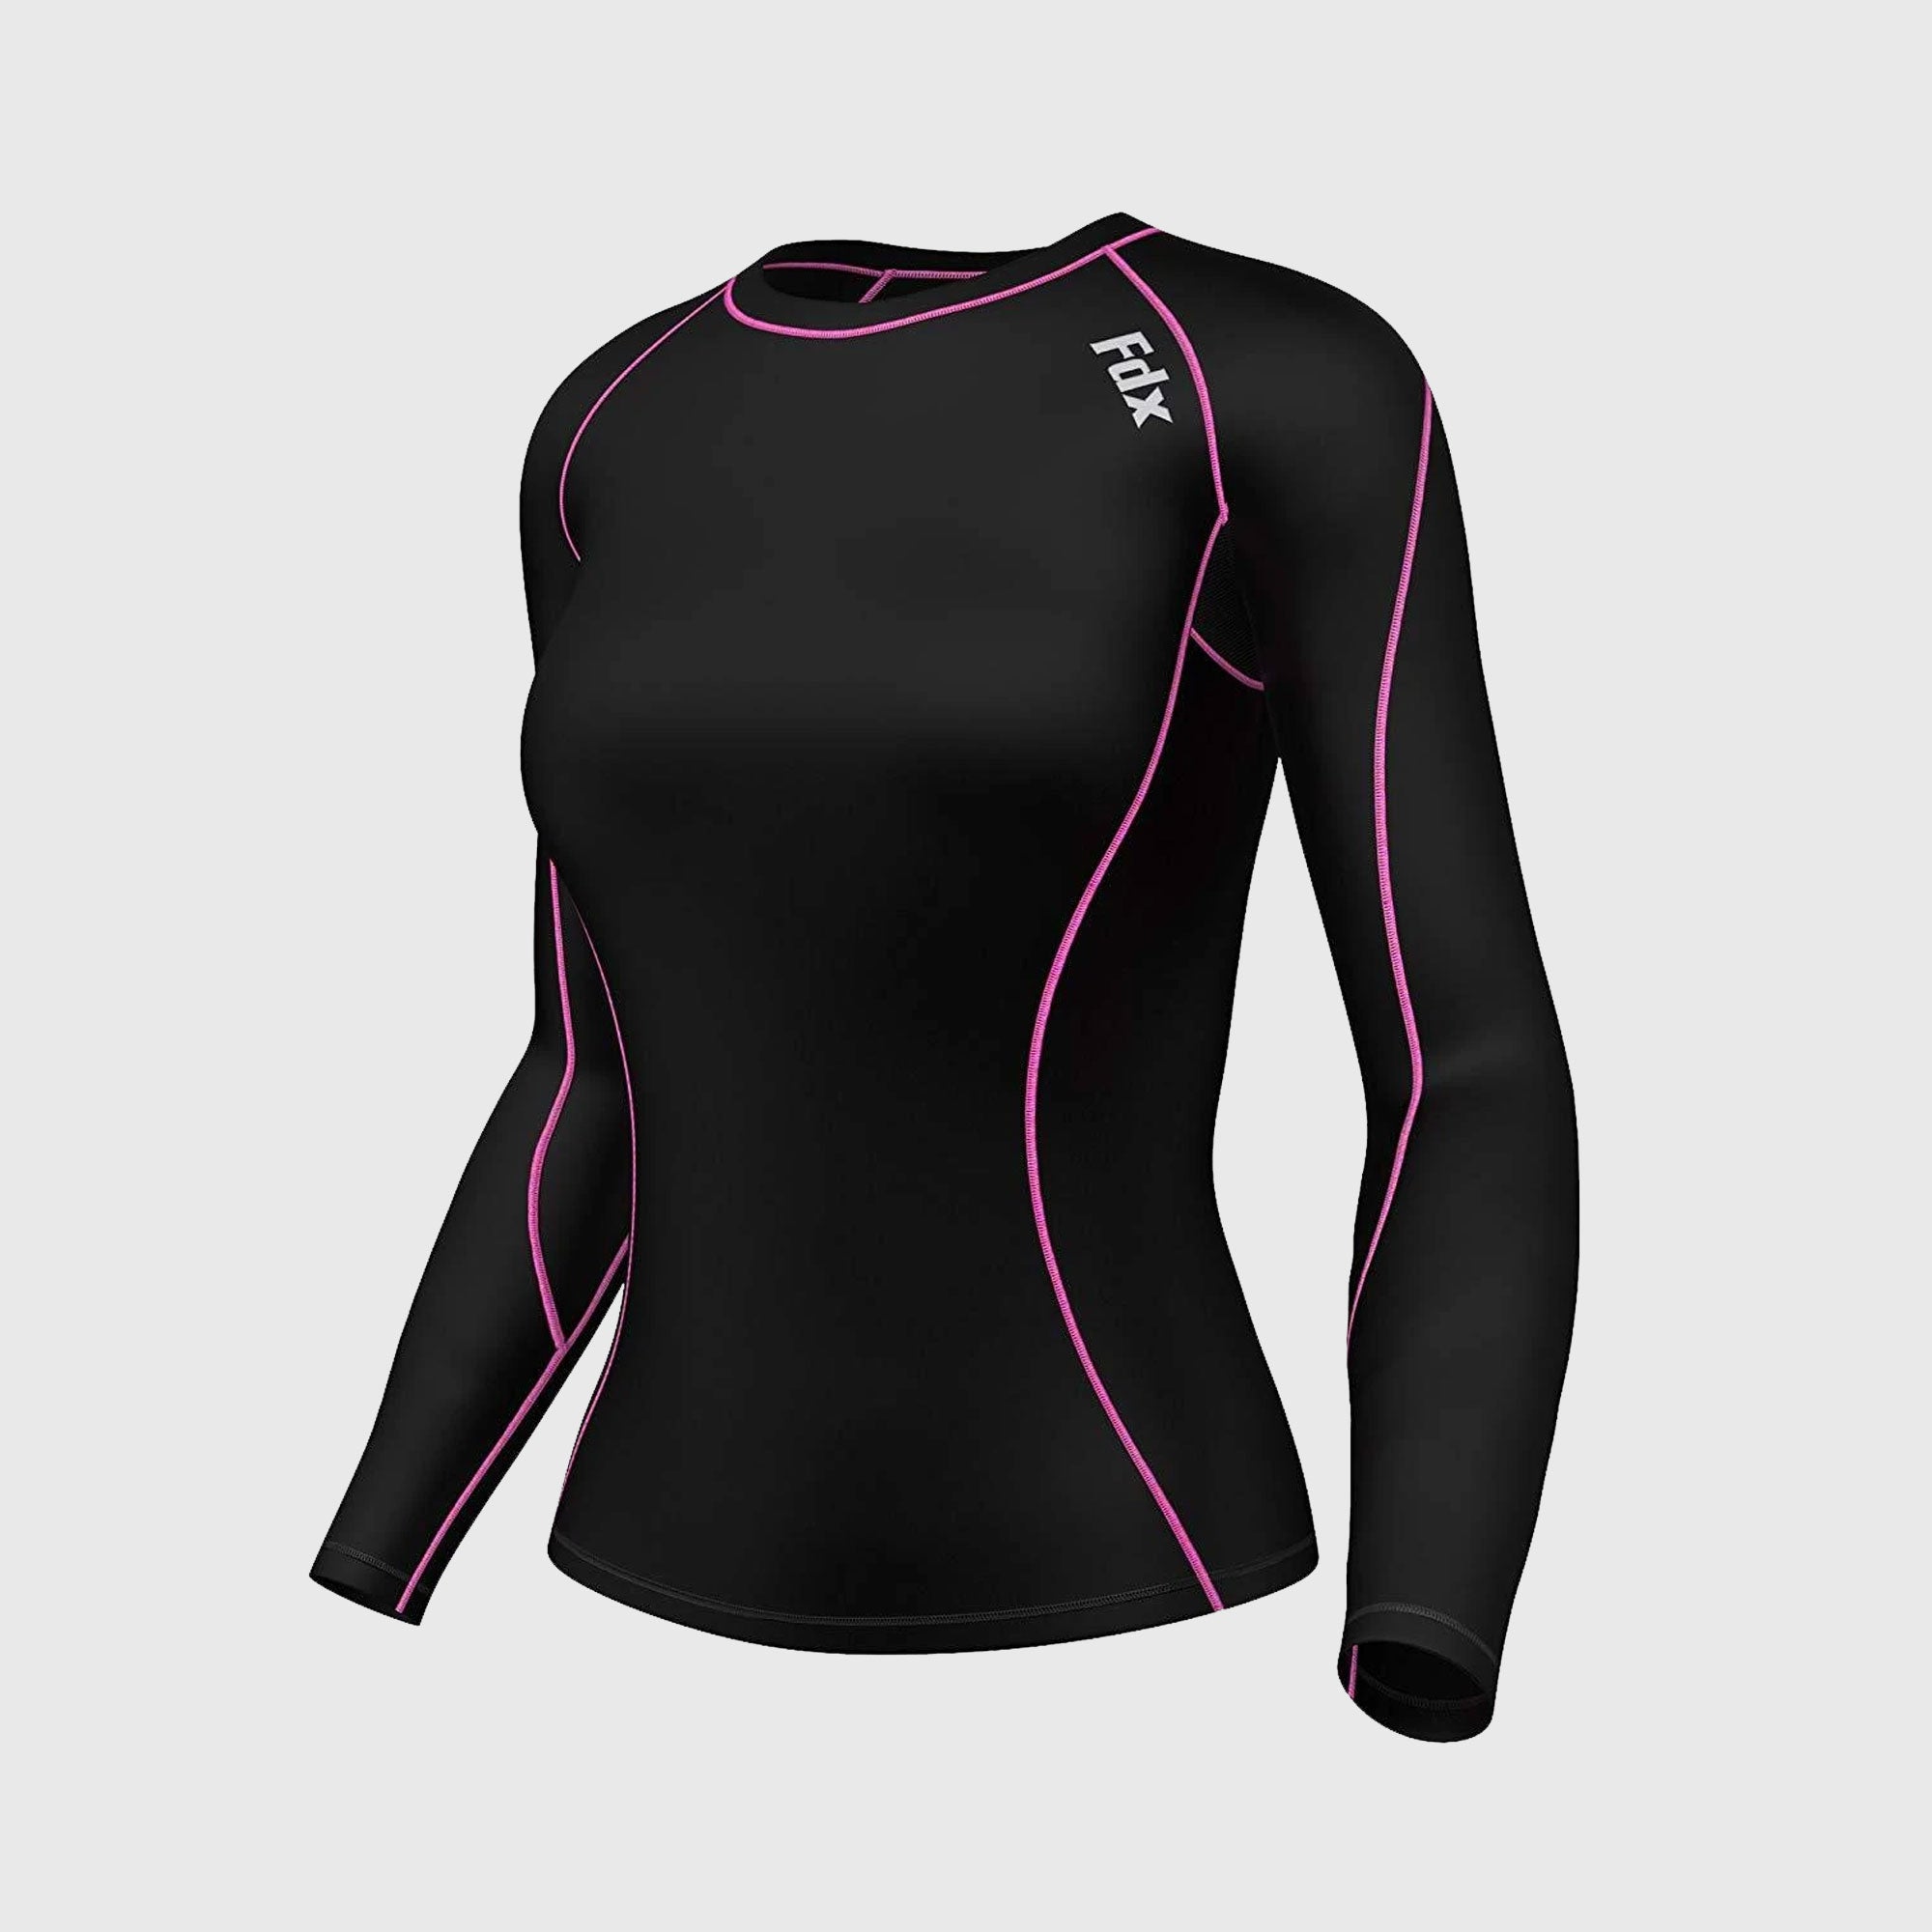 Fdx Monarch Pink Women's Base Layer Long Sleeve Compression Top